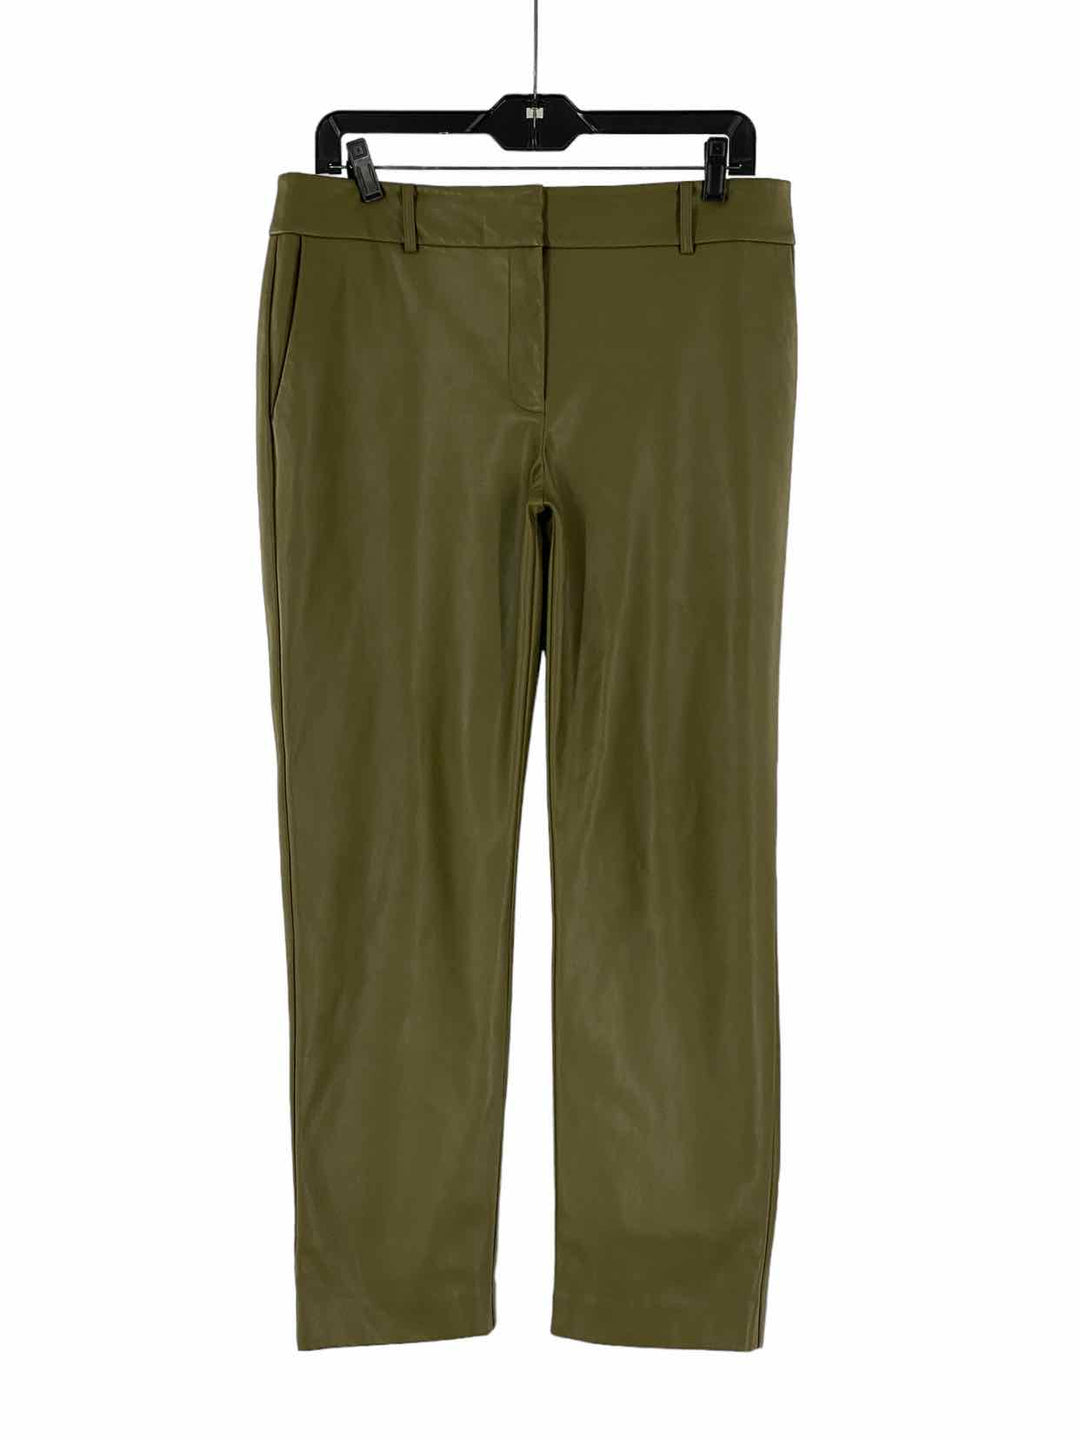 Ann Taylor Size 6 Olive Green Faux Leather Pants